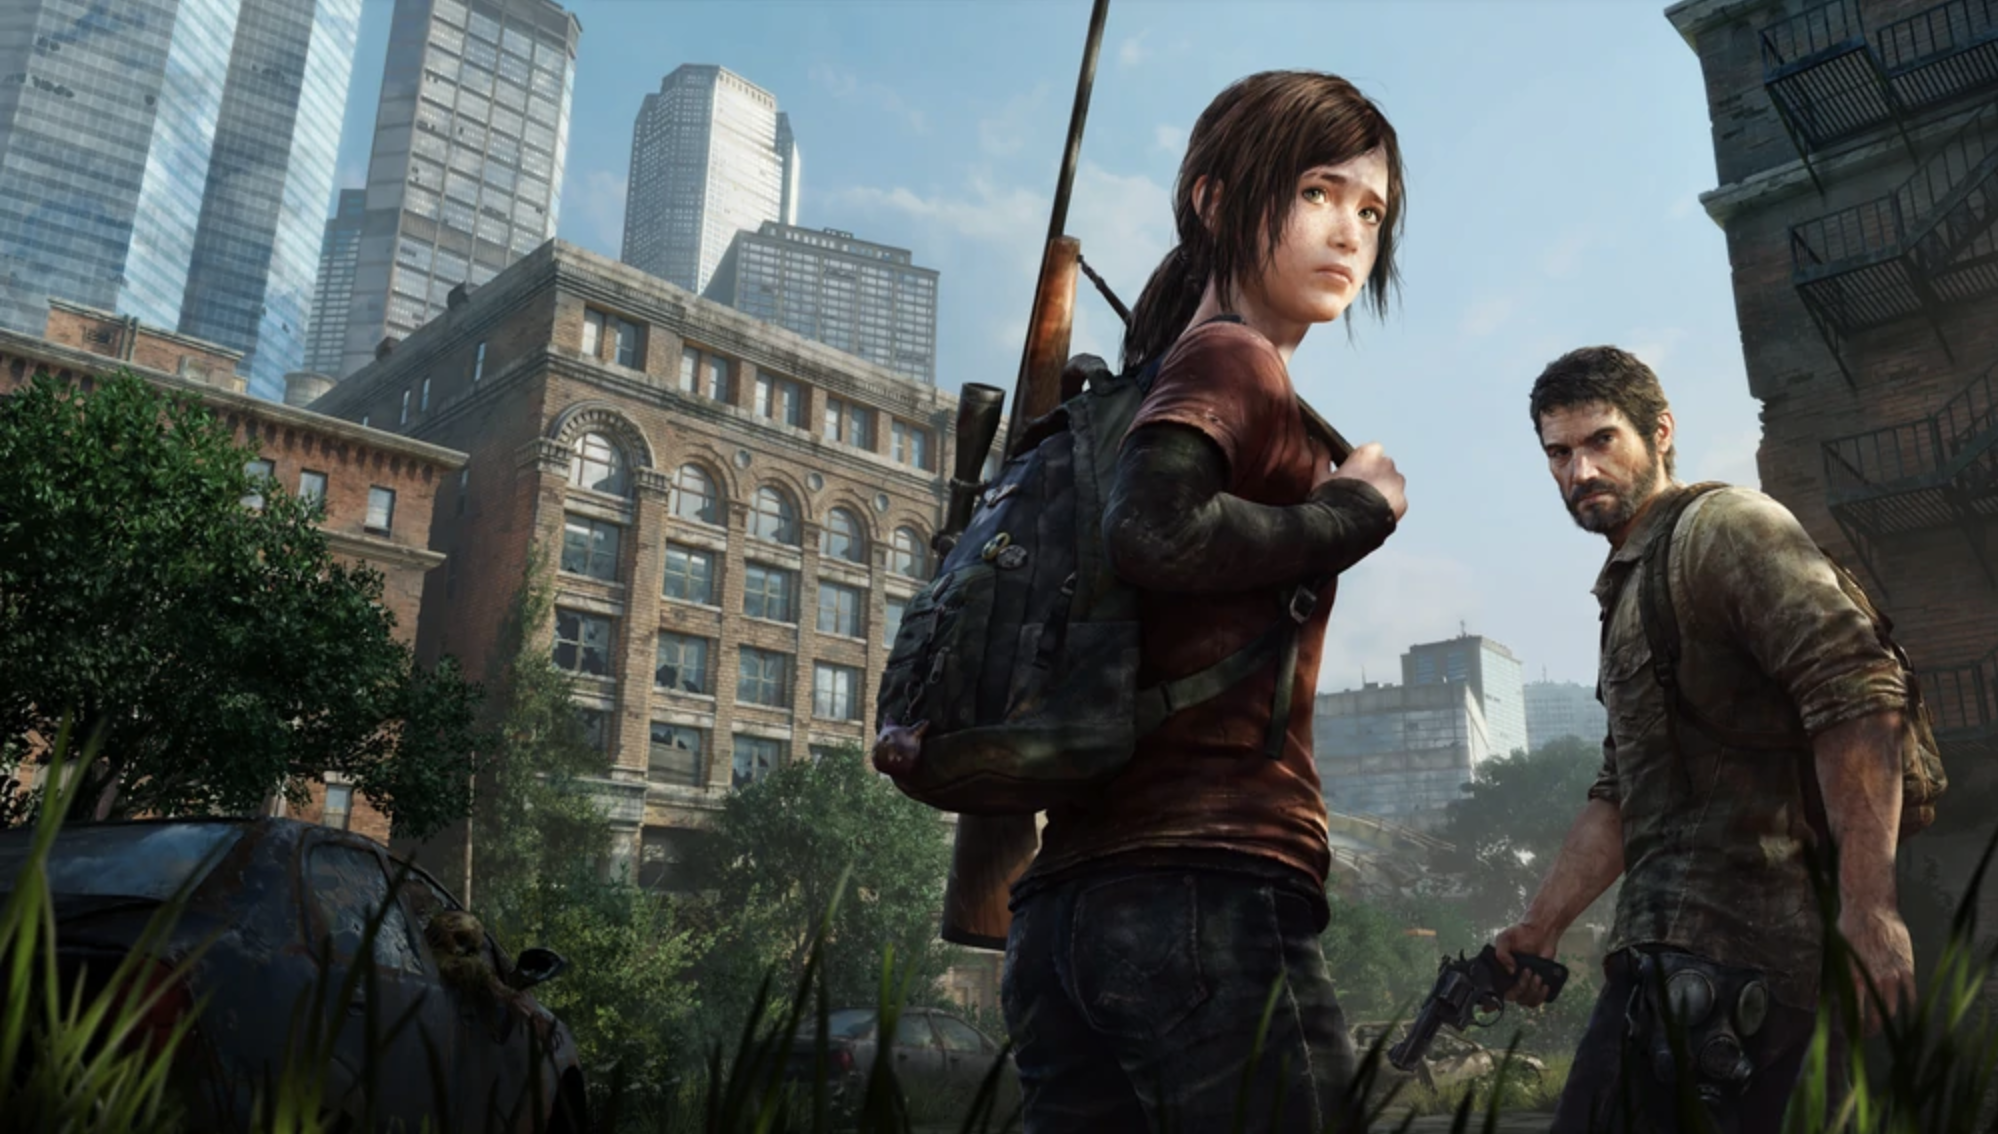 Keep making art: The Last of Us author Neill Druckmann supports Rockstar  developers after Grand Theft Auto VI data leak